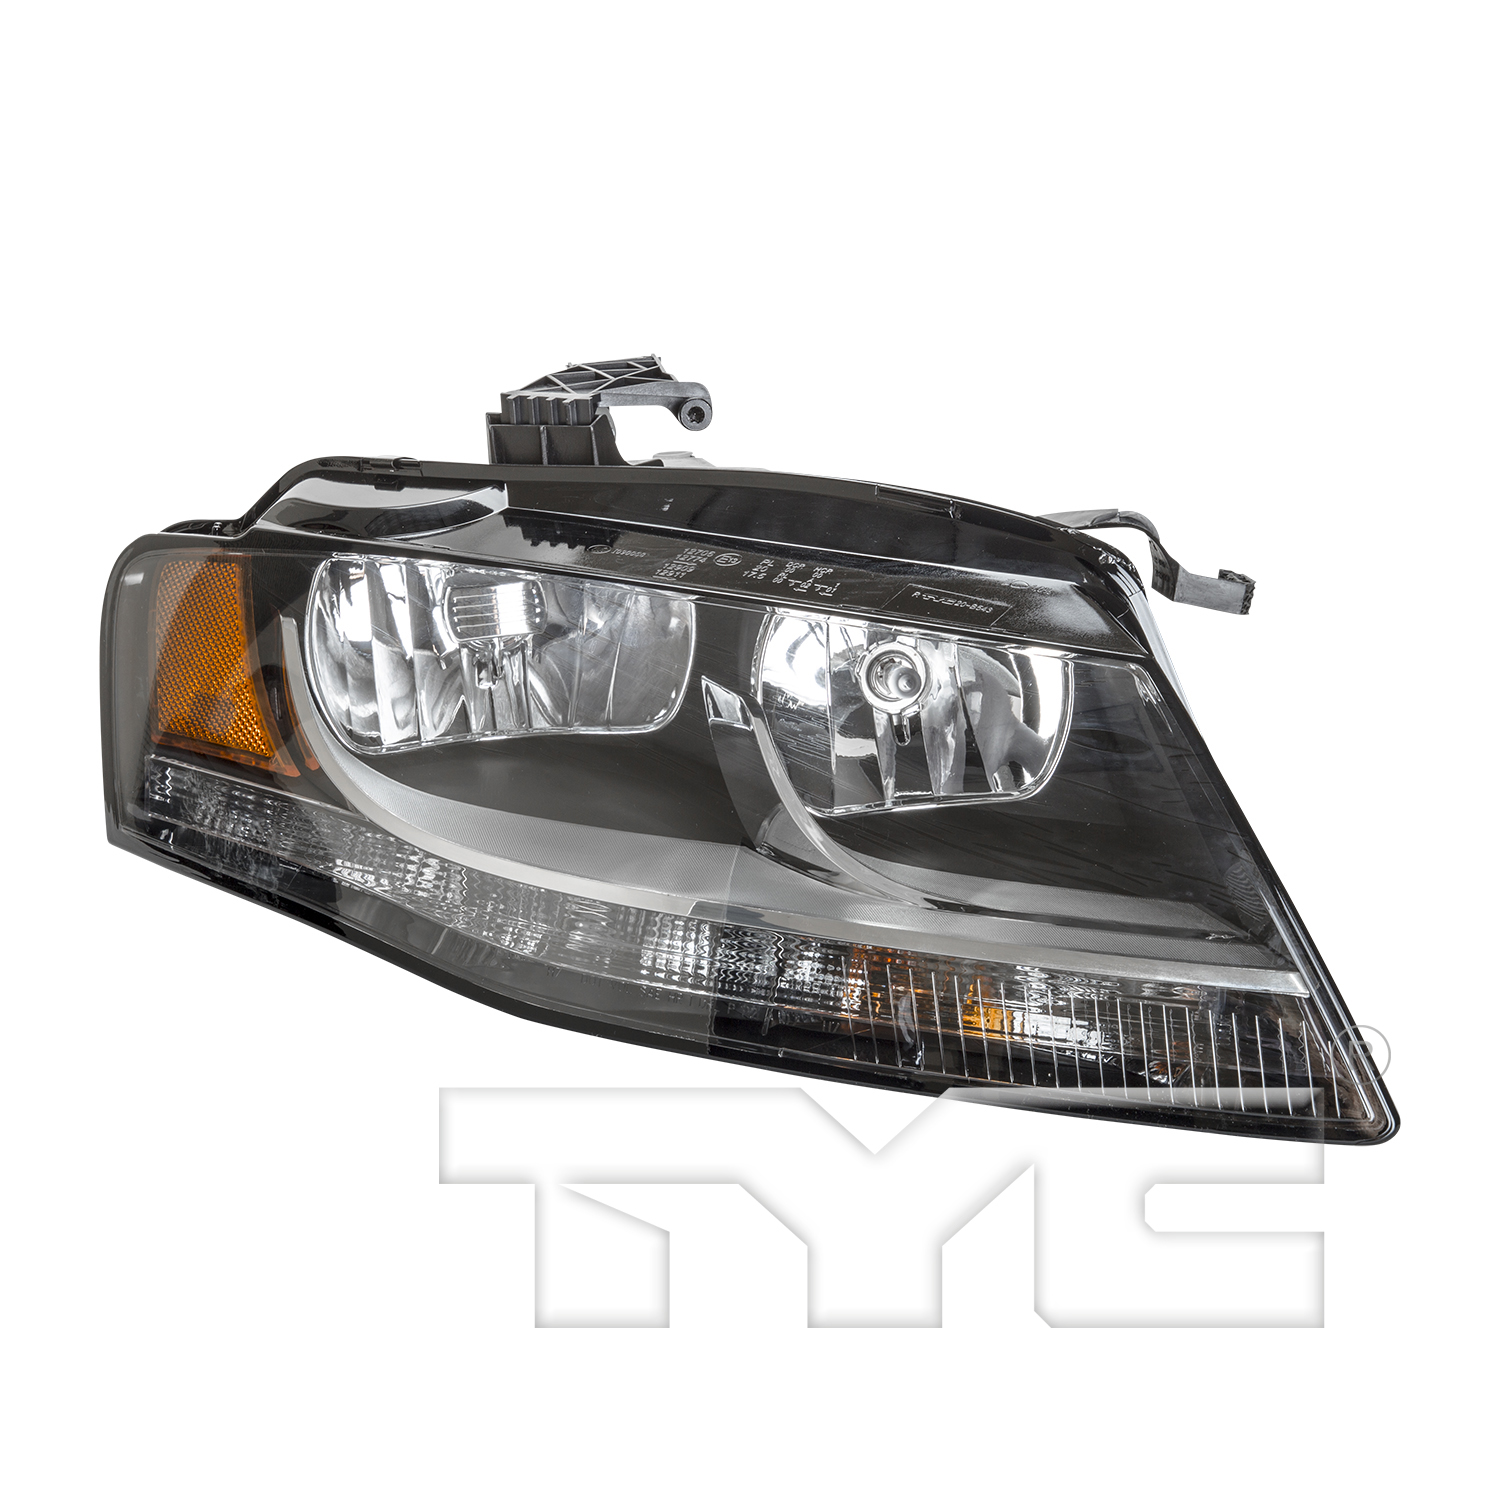 Aftermarket HEADLIGHTS for AUDI - S4, S4,10-12,RT Headlamp assy composite